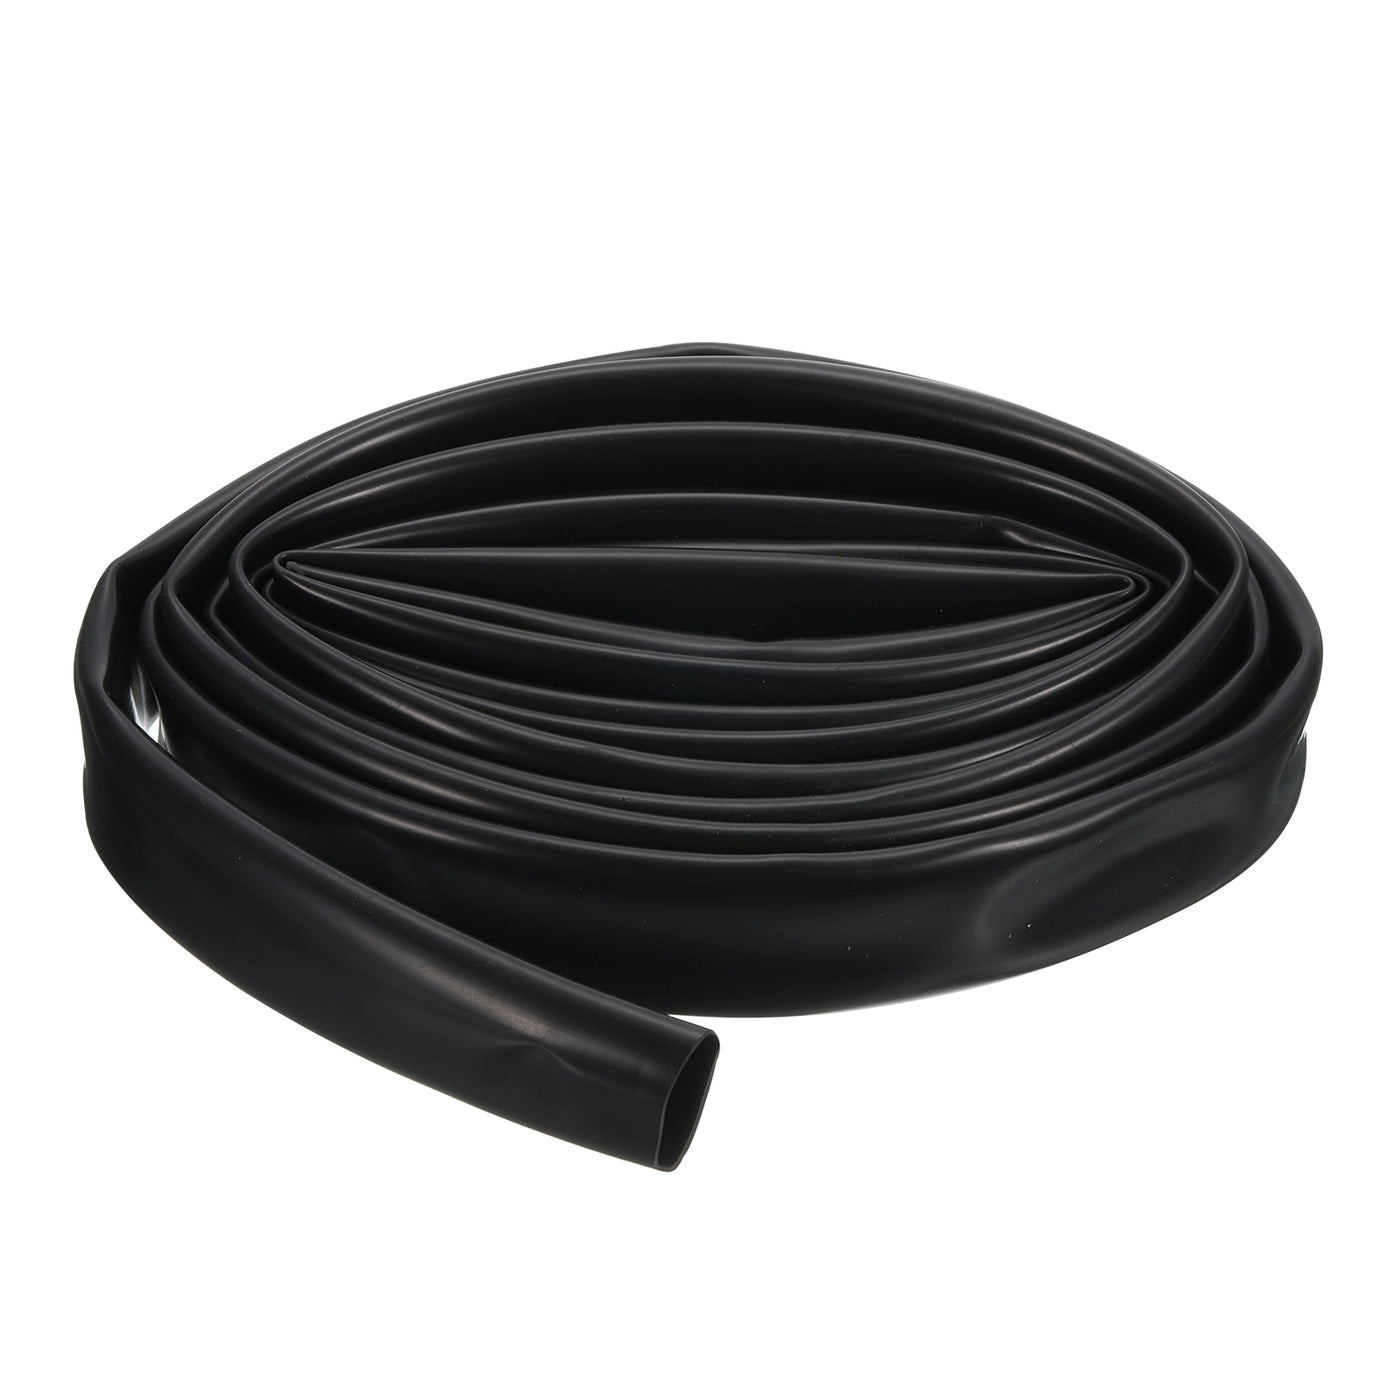 uxcell Uxcell Black PVC Tube Wire Harness Tubing, 20mm ID 10ft Sleeve for Wire Sheathing Wire Protection